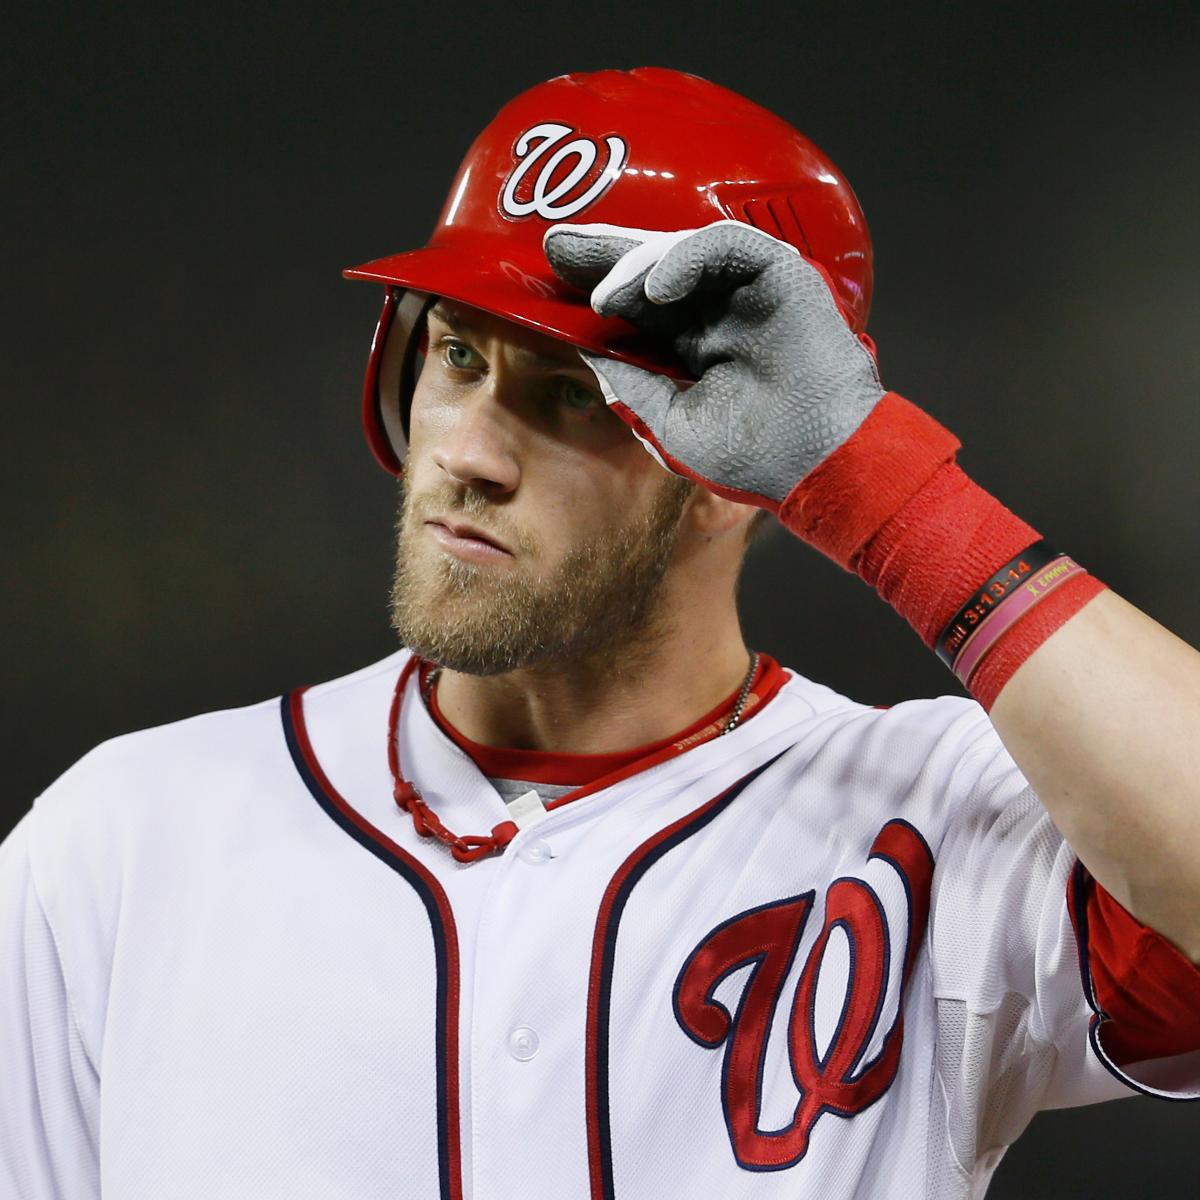 Searching for Bryce Harper's Girlfriend: Nats Slugger's Dating Life a Mystery ...